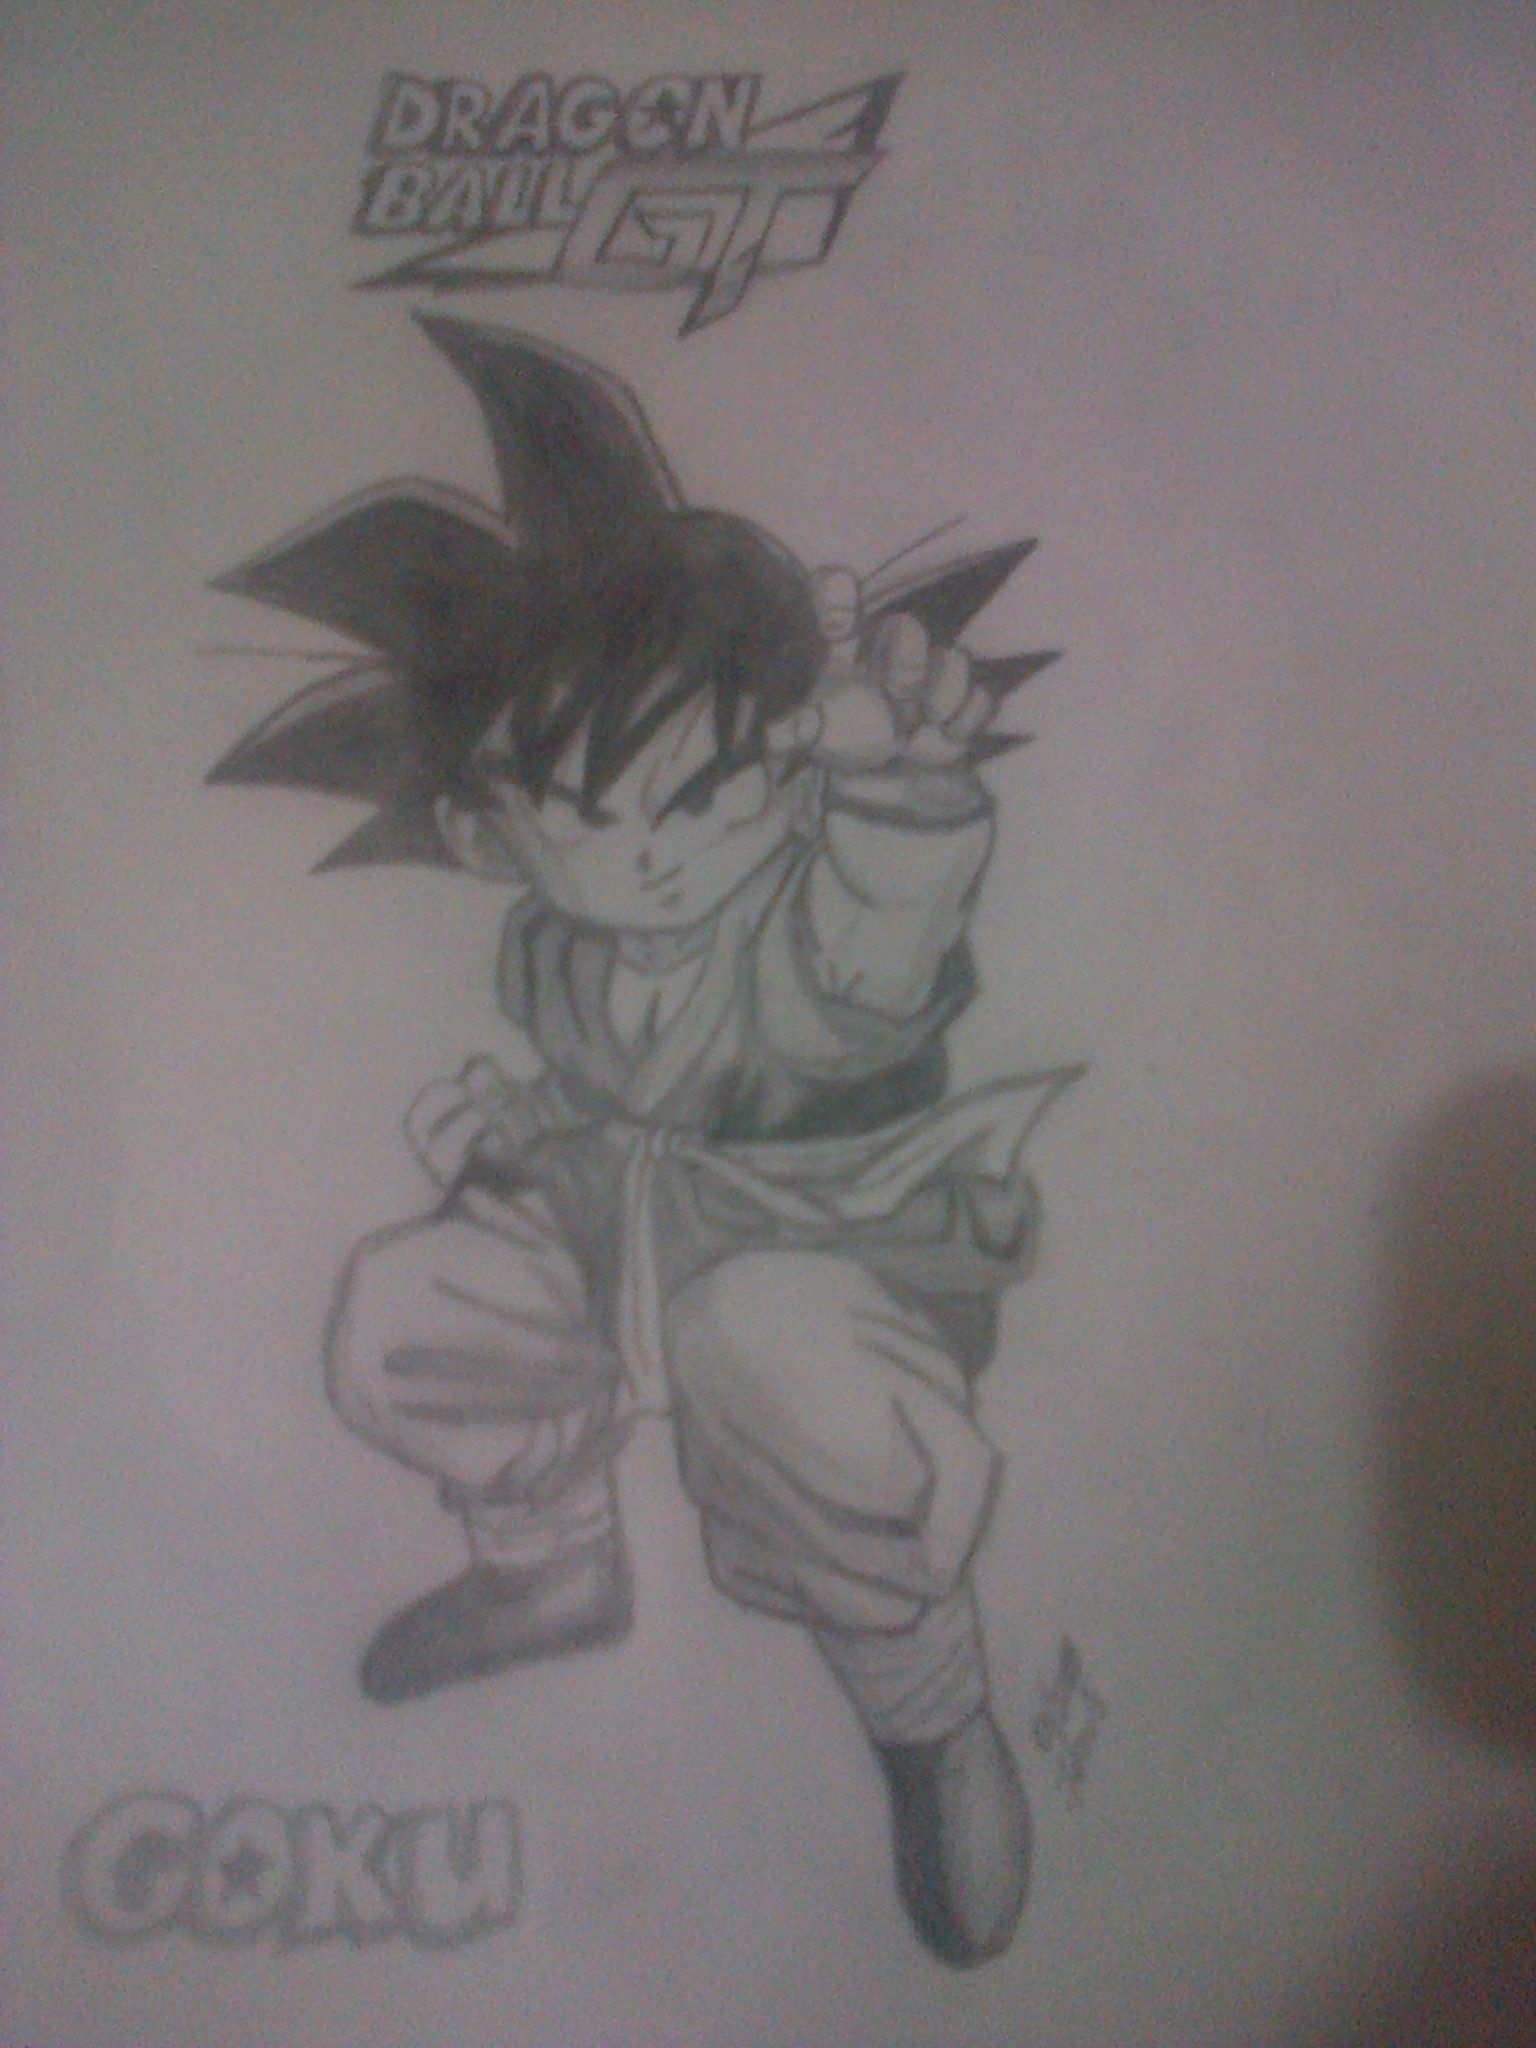 Drawing of Goku only used a pencil — Steemit